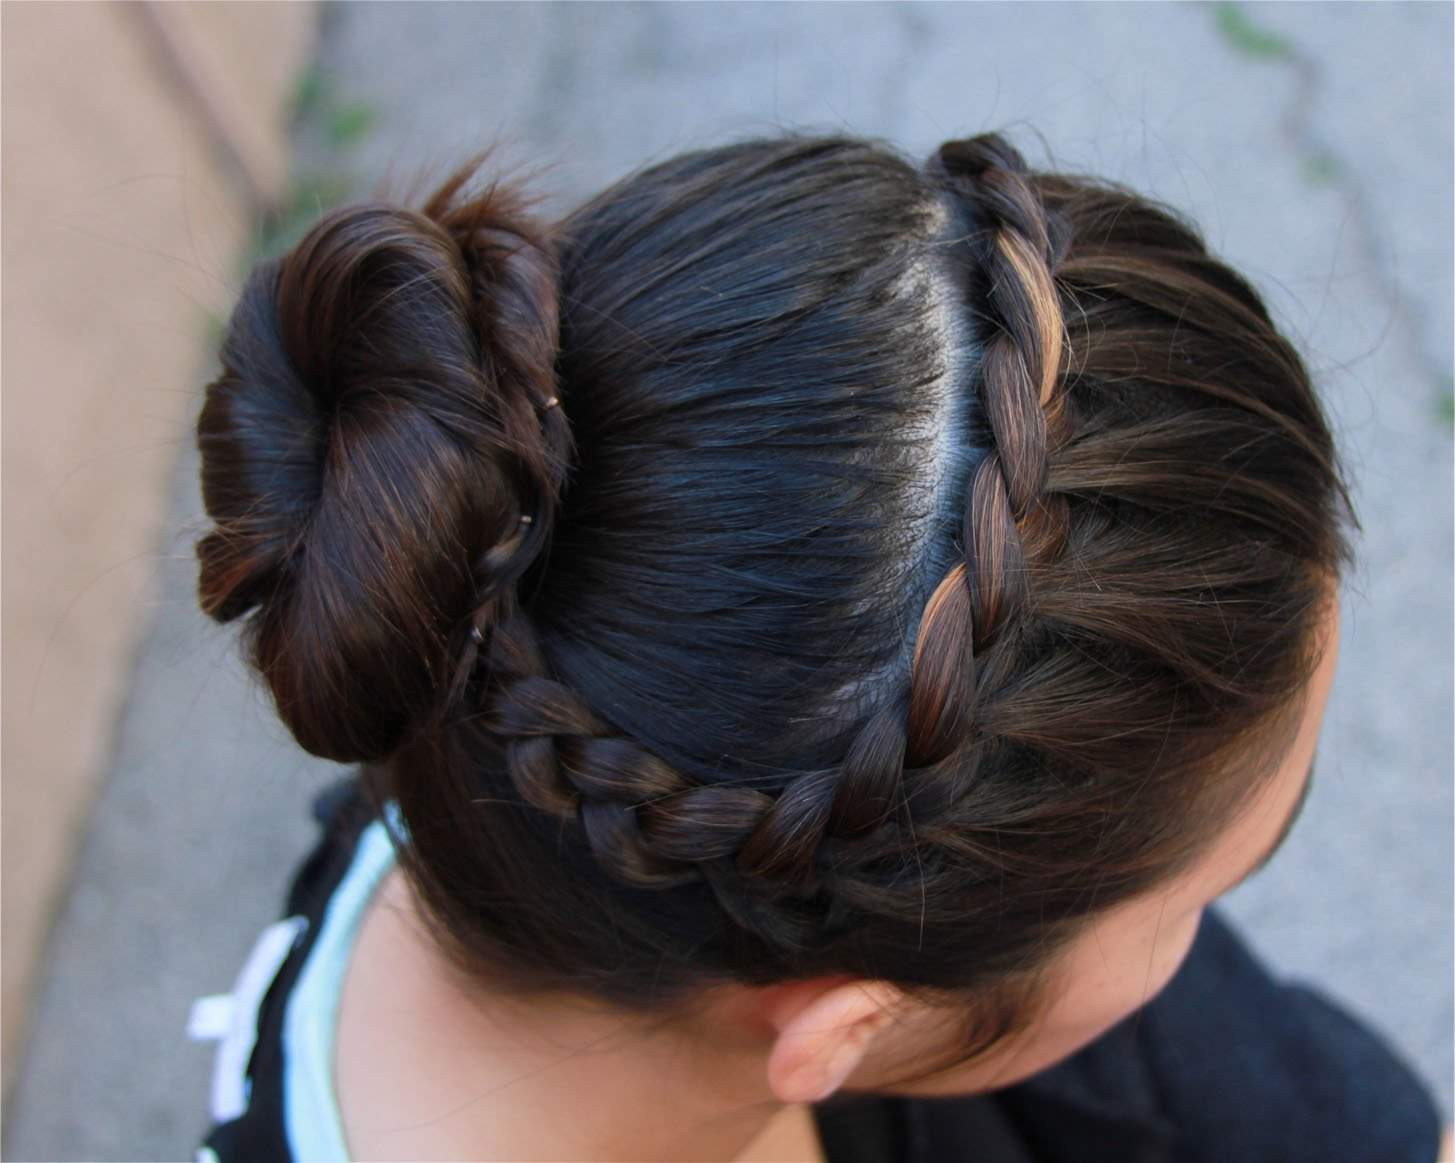 Cute And Easy Braided Hairstyles
 Easy Buns and Braided Hairstyles